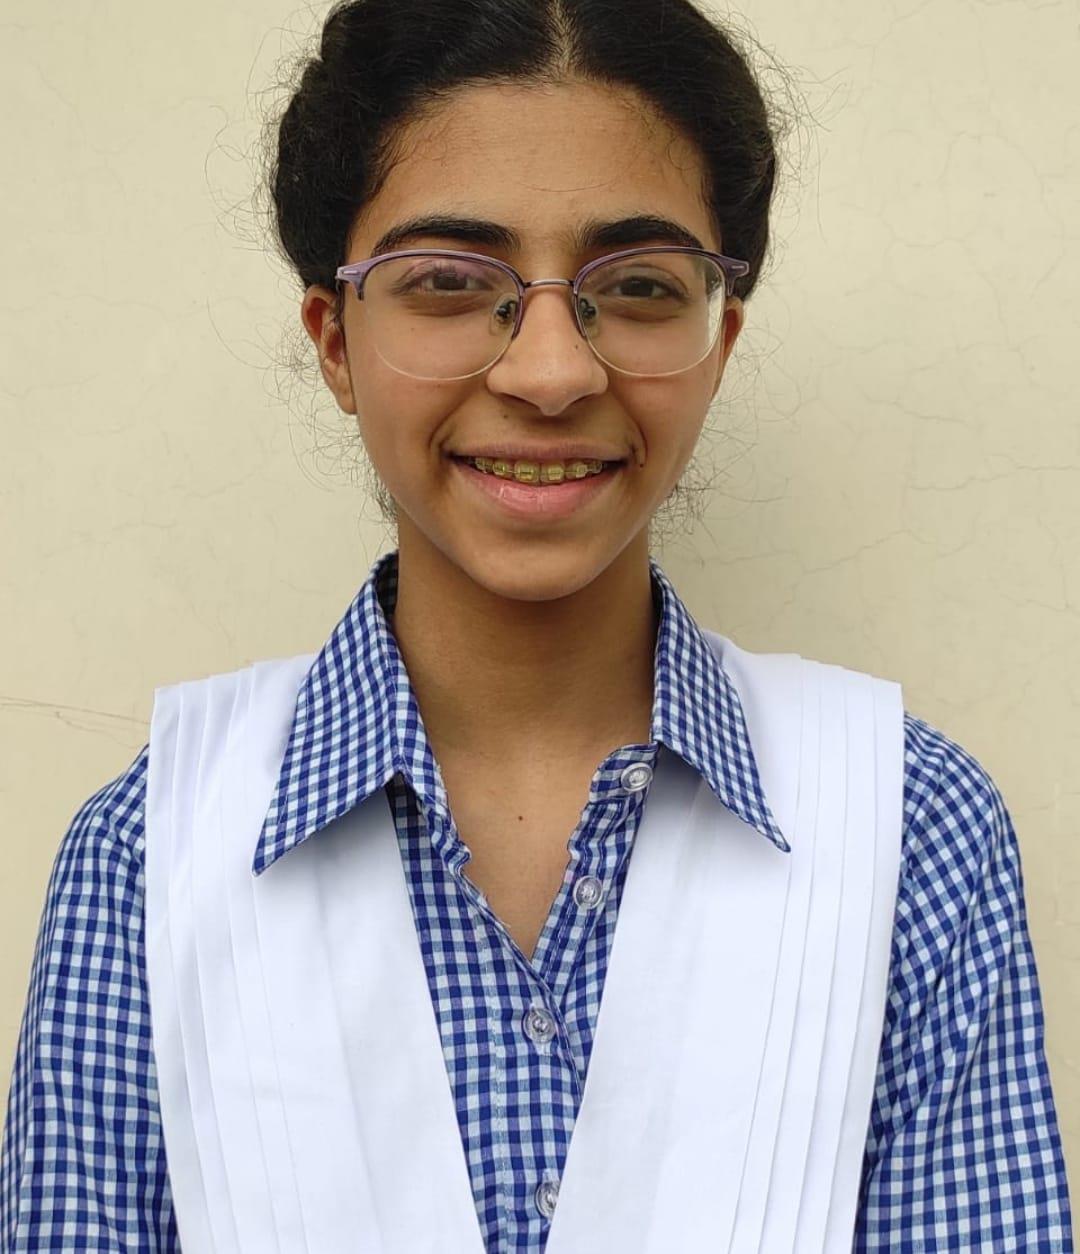 Ludhiana girl brings laurels in International Astronomy and Astrophysics Competition